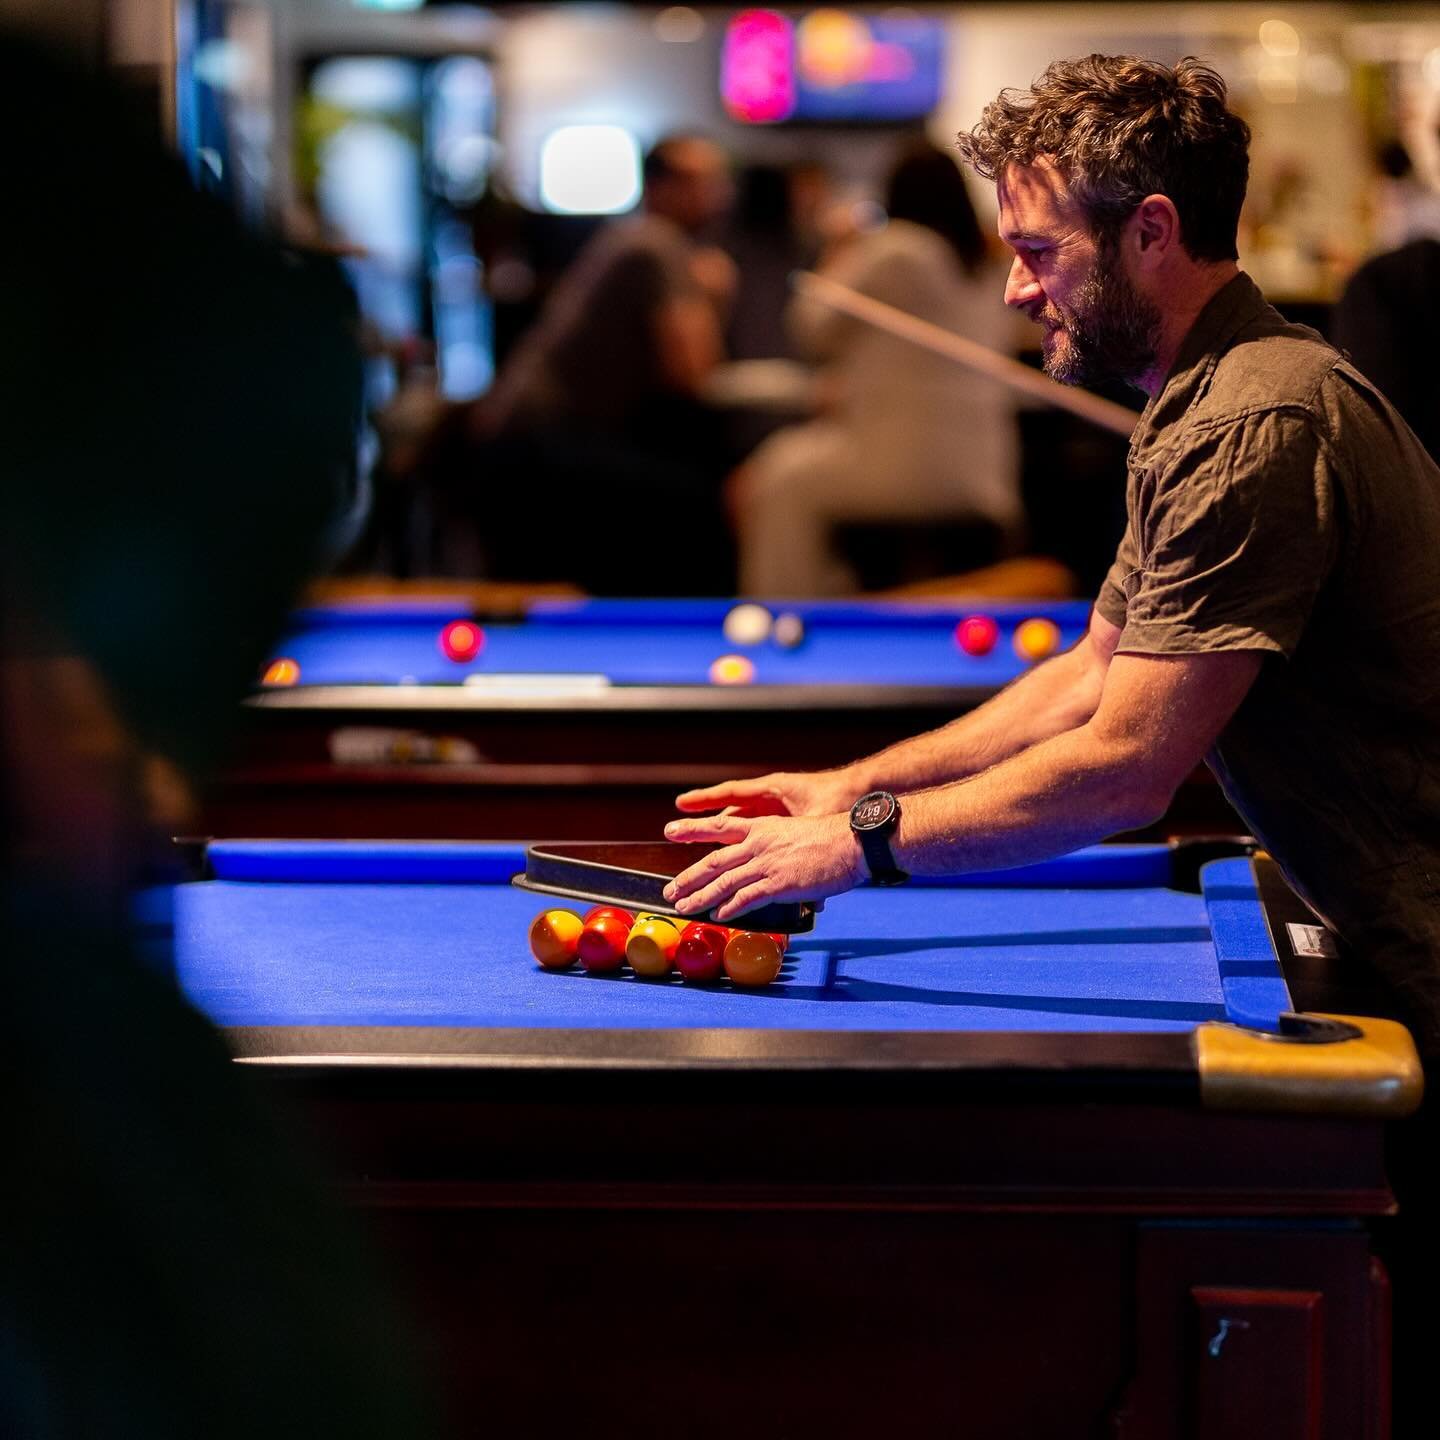 Rack &lsquo;em up! The weekend has landed. And we&rsquo;ve got everything you need for a great one. Footy on the big screen ✅ Great food and drink ✅ Heated, covered beer garden ✅ Pool, pinball and good times ✅ See you at the bar!